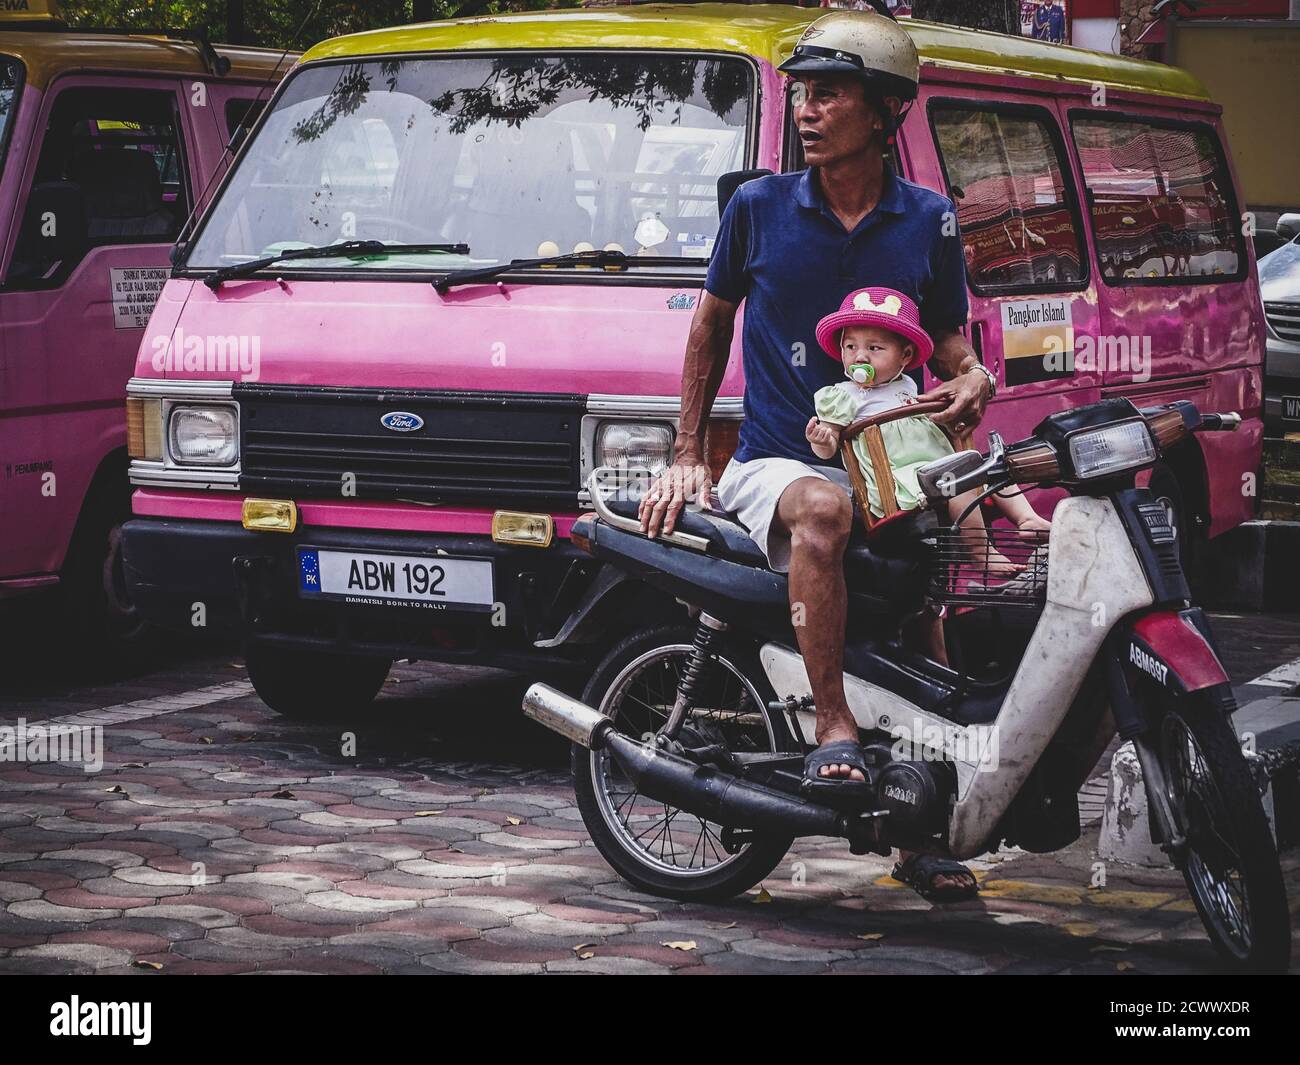 An Asian man with his daughter on a motorcycle shot by the colectivo pick-up spot on Pangkor Island, Malaysia Stock Photo